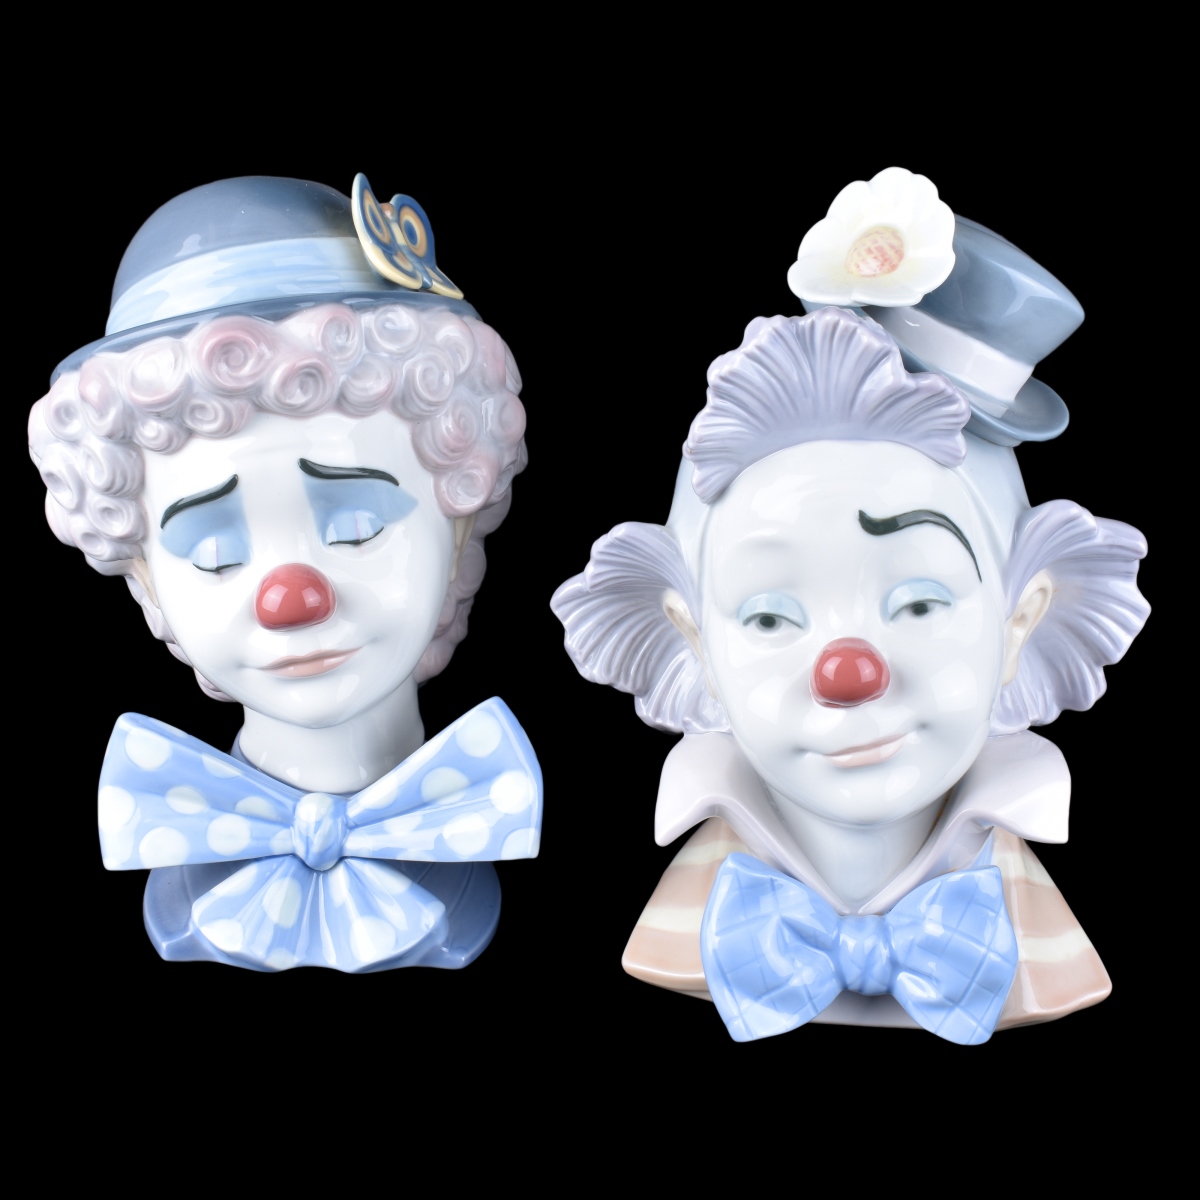 Two Lladro Figurines